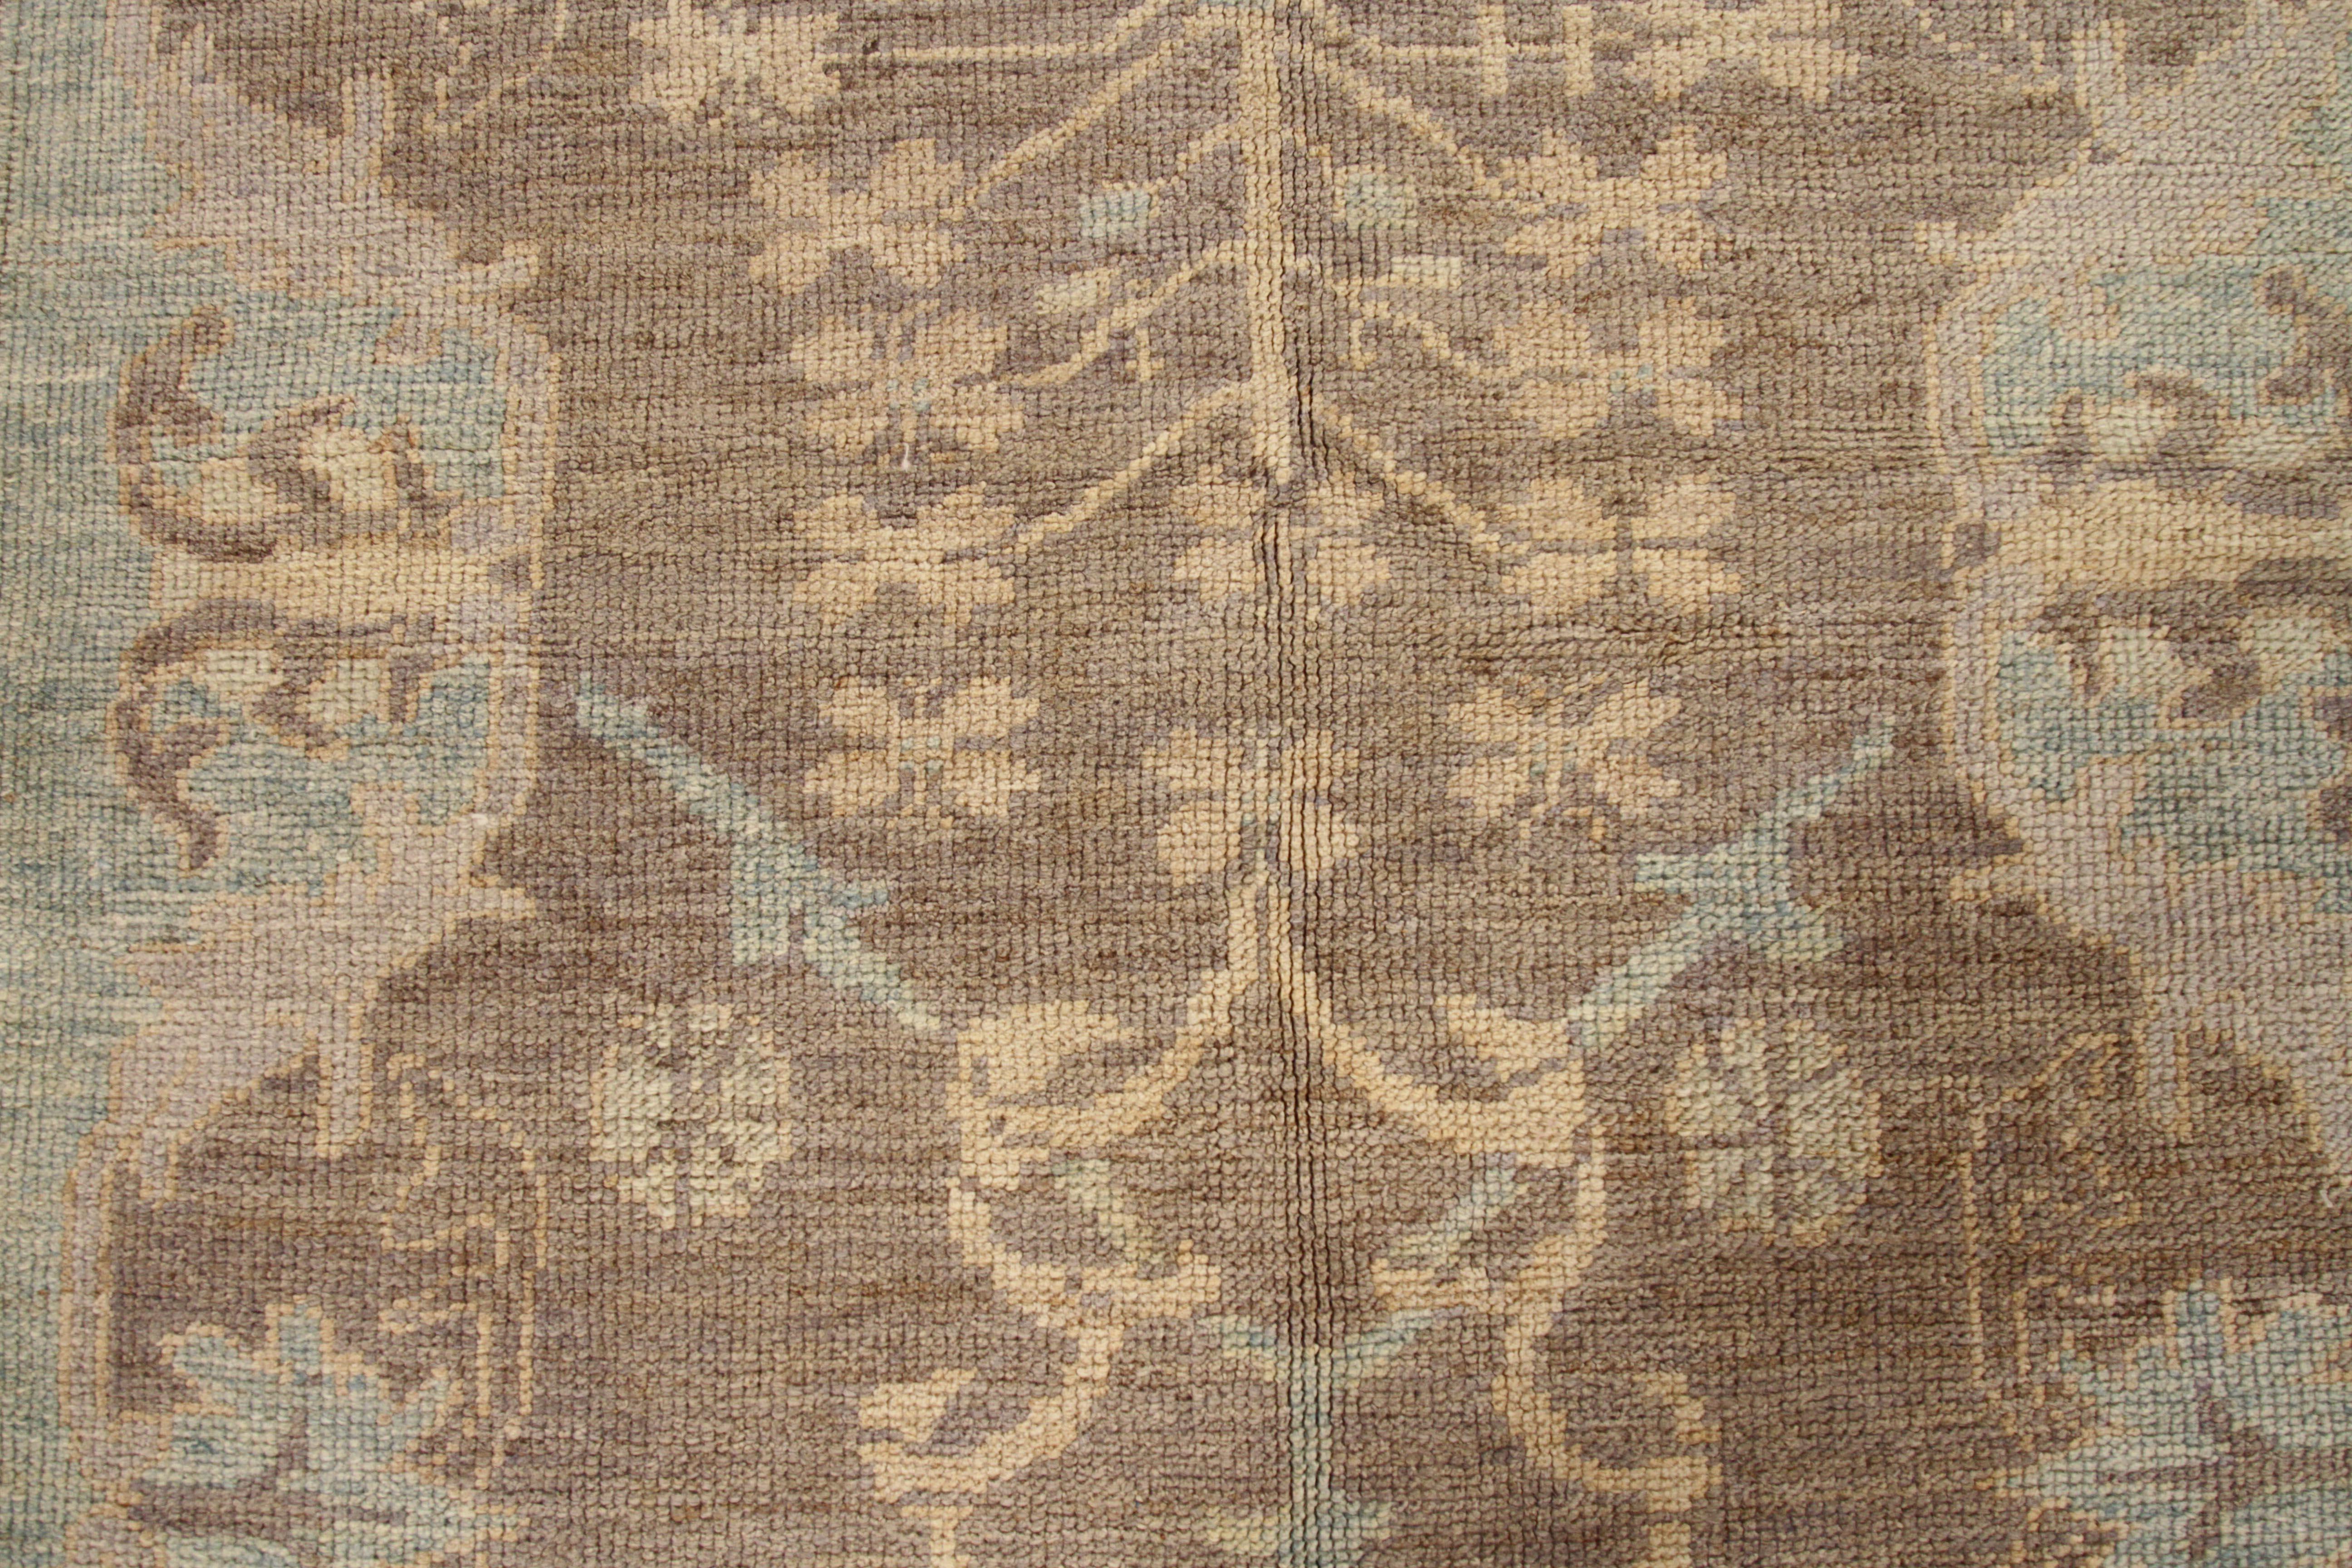 Hand-Knotted New Persian Oushak Rug with Brown and Blue Floral Design Patterns For Sale